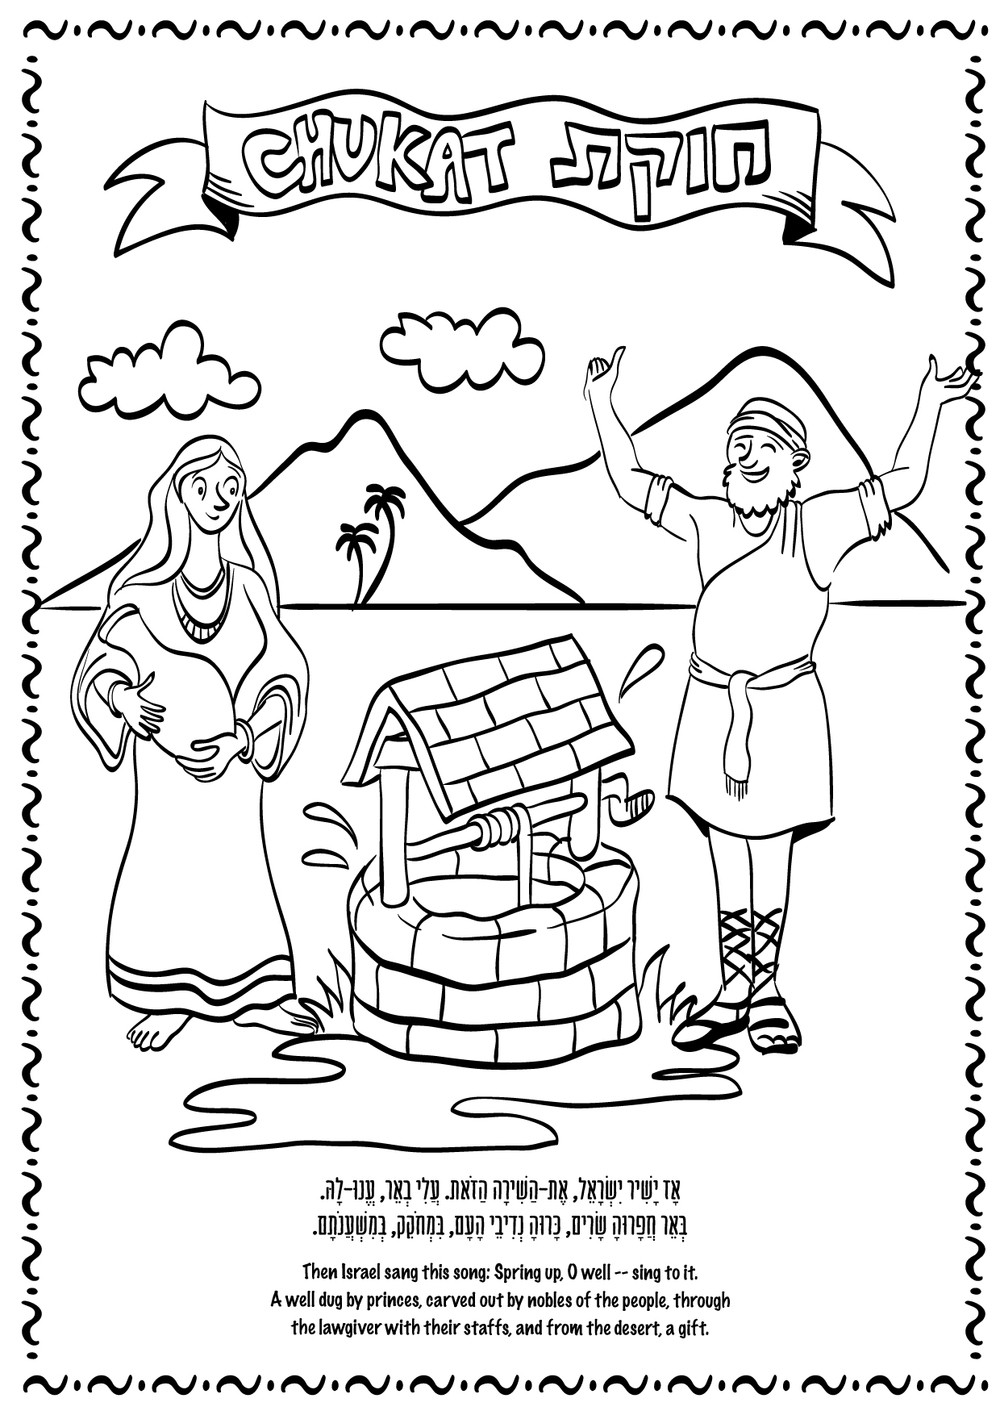 coloring : Spring Time Coloring Pages Luxury E Parsha At A Time Coloring  Pages Aim To Make Torah More Spring Time Coloring Pages ~ queens